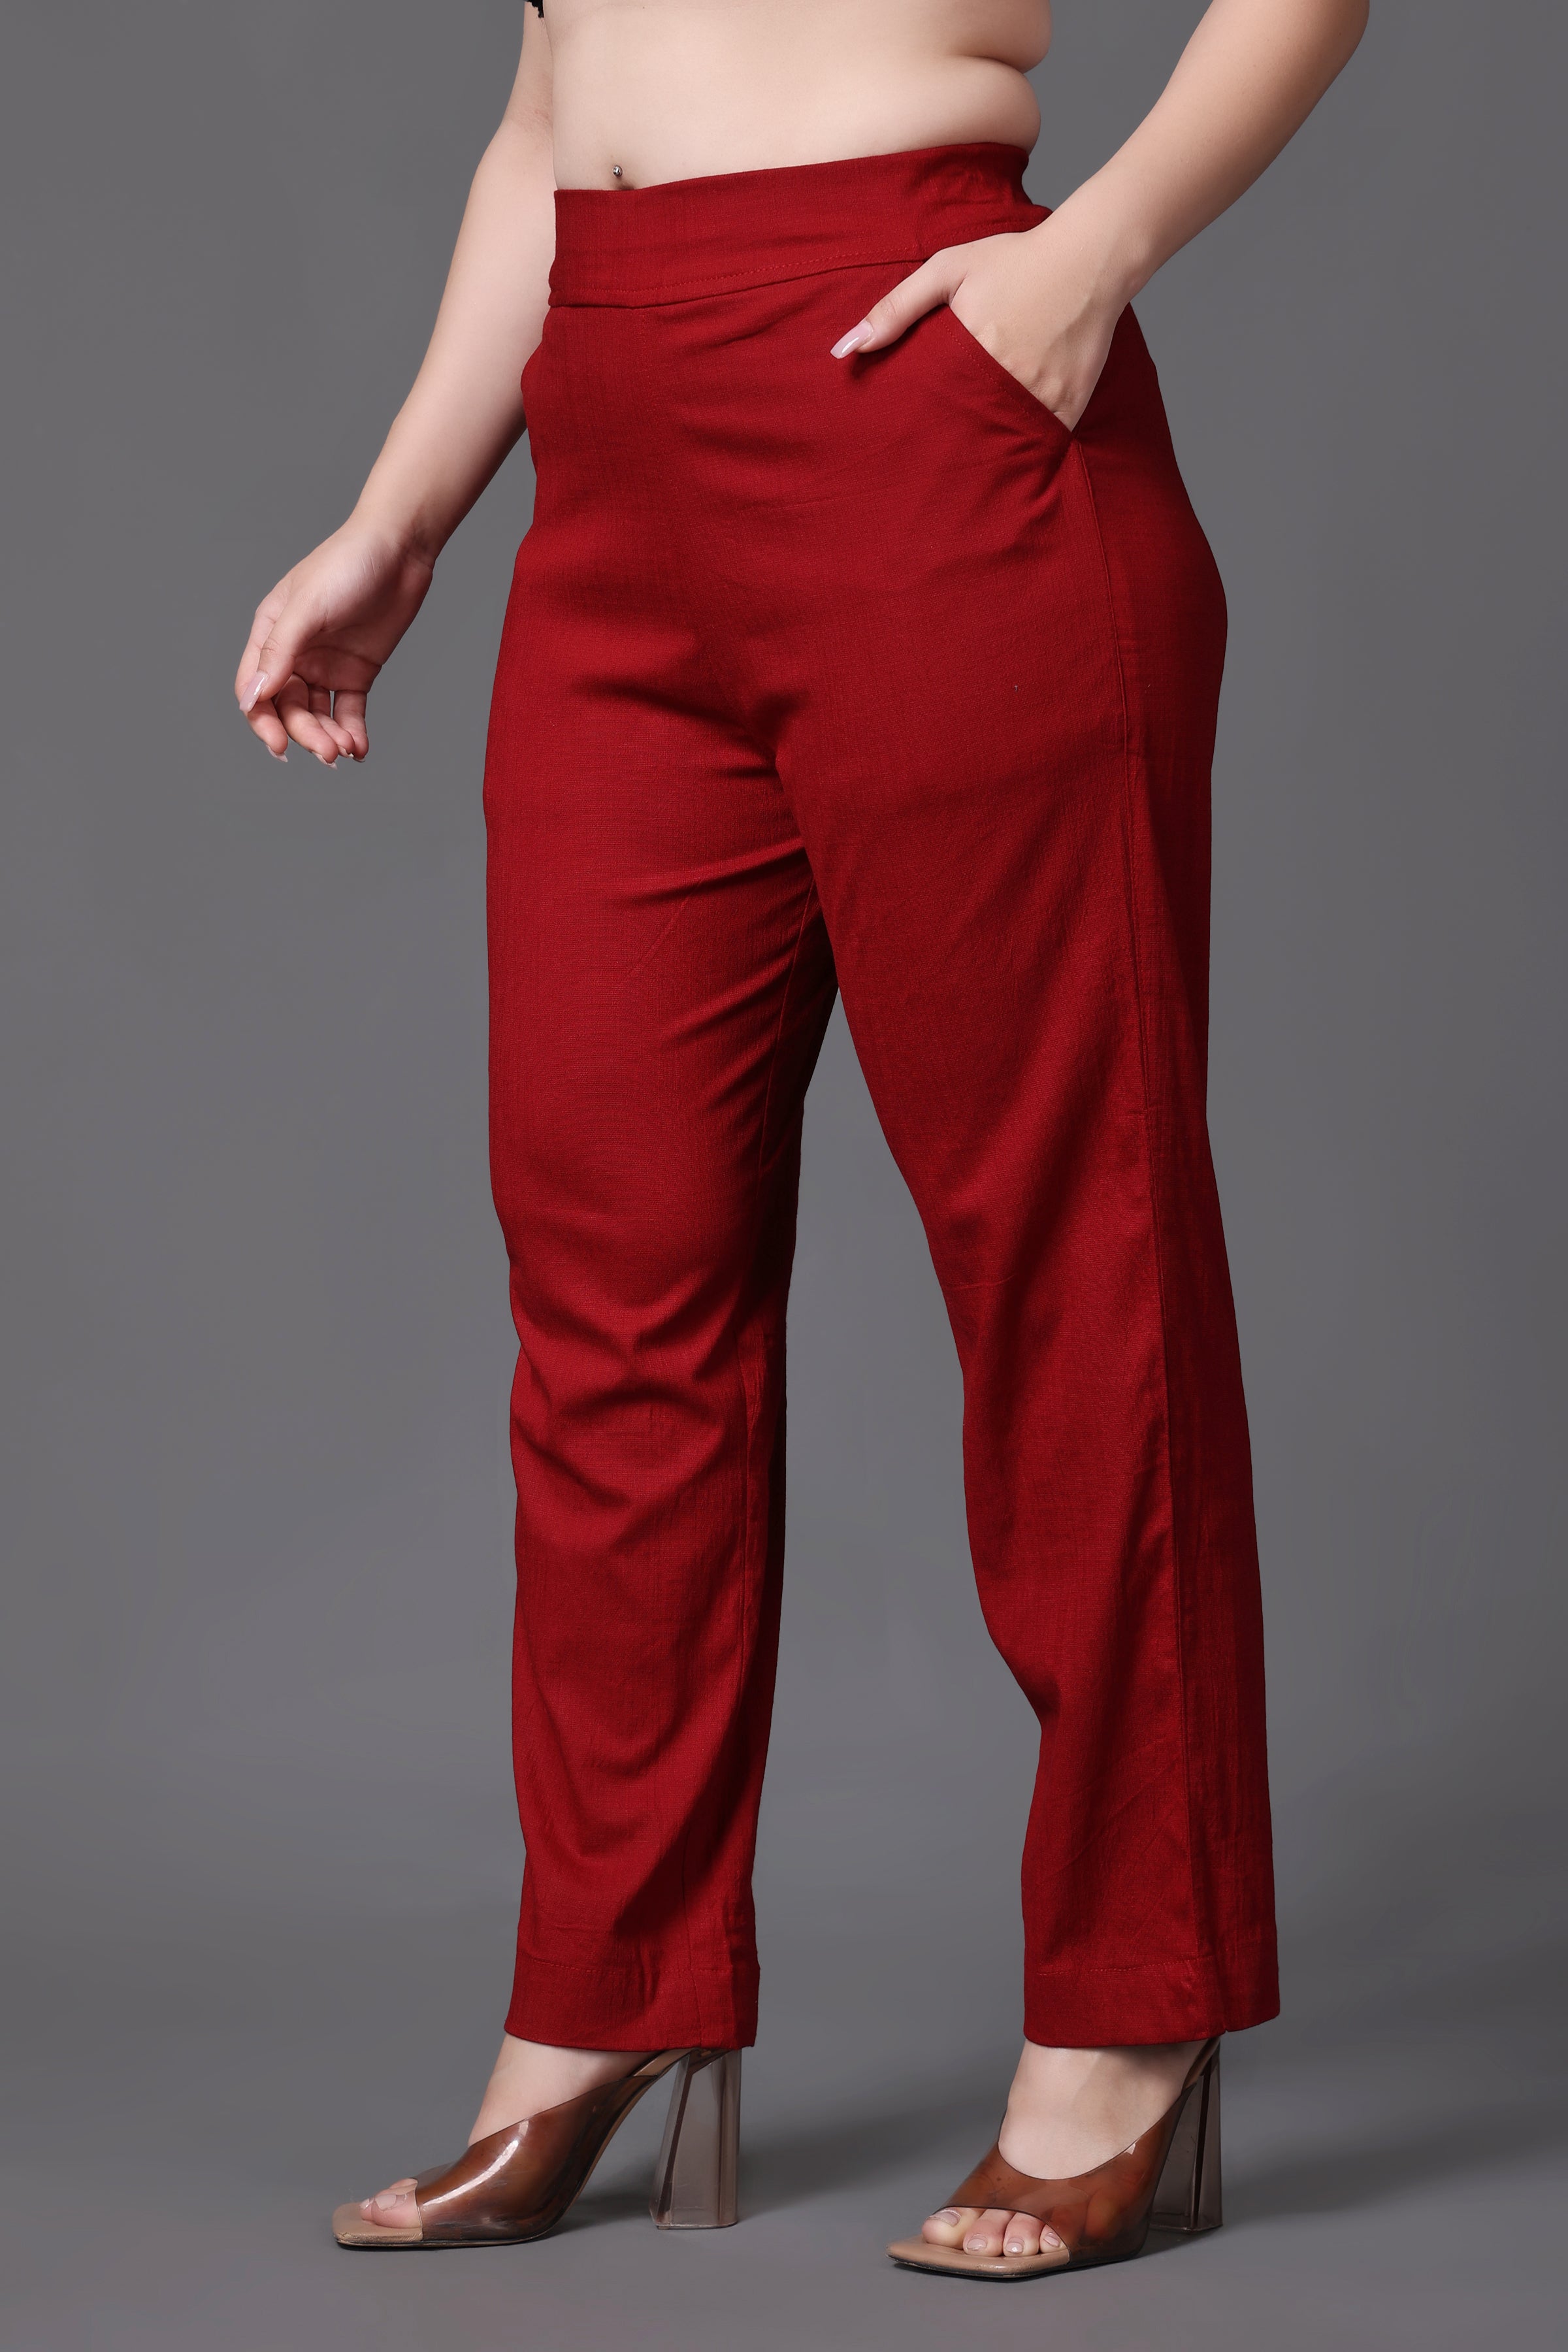 Lining Womens Formal Trouser Pants in Mysore  Dealers Manufacturers   Suppliers  Justdial